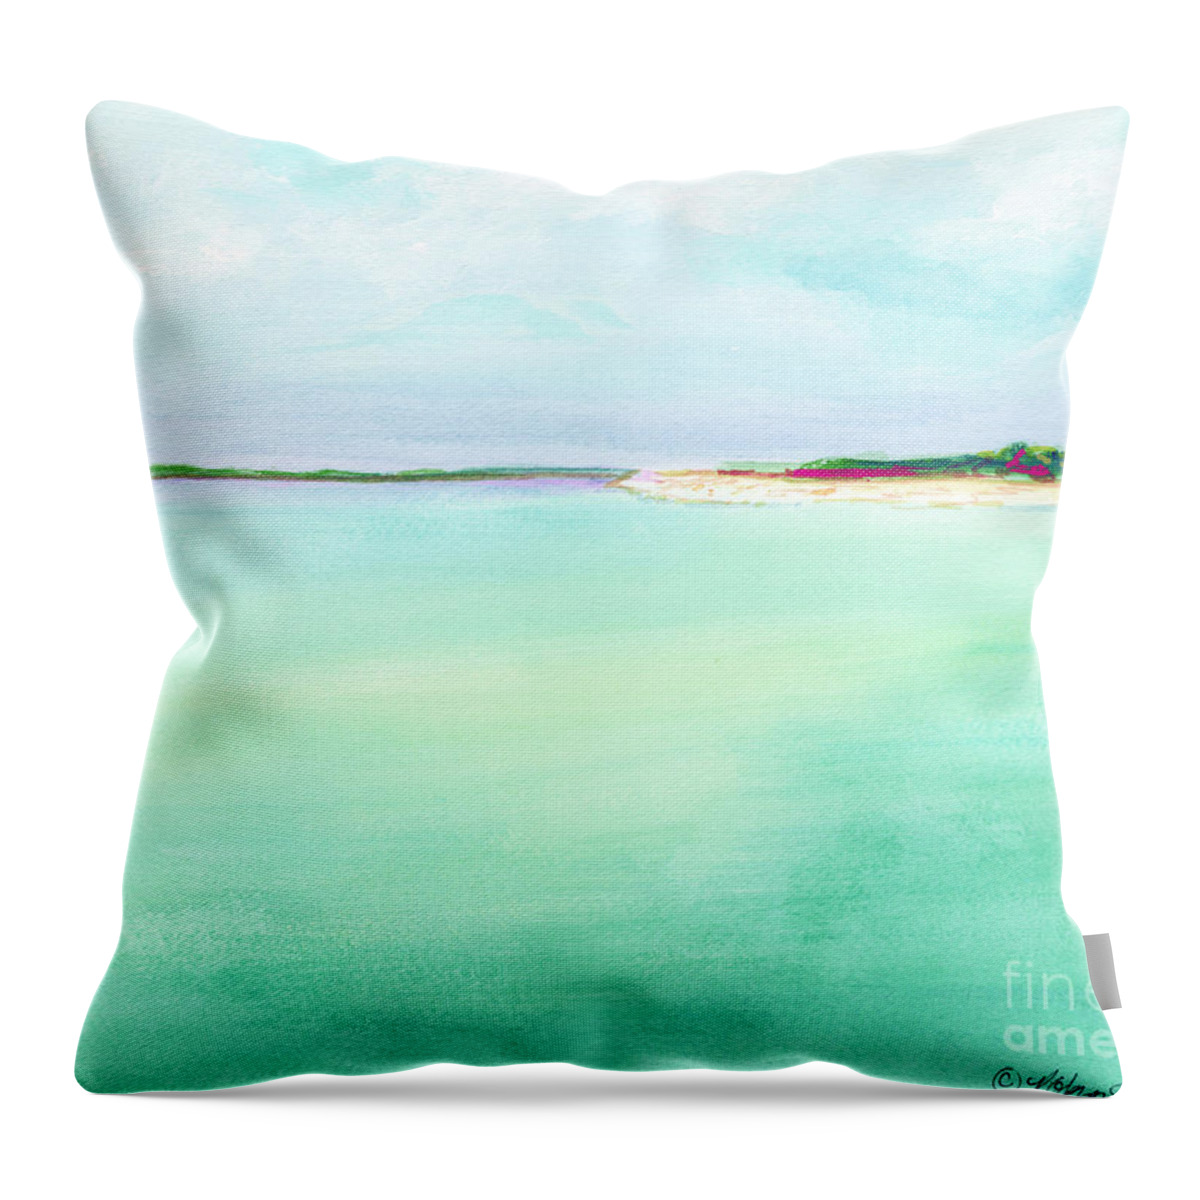 Ocean Scene Throw Pillow featuring the painting Turquoise Caribbean Beach Horizontal by Robyn Saunders